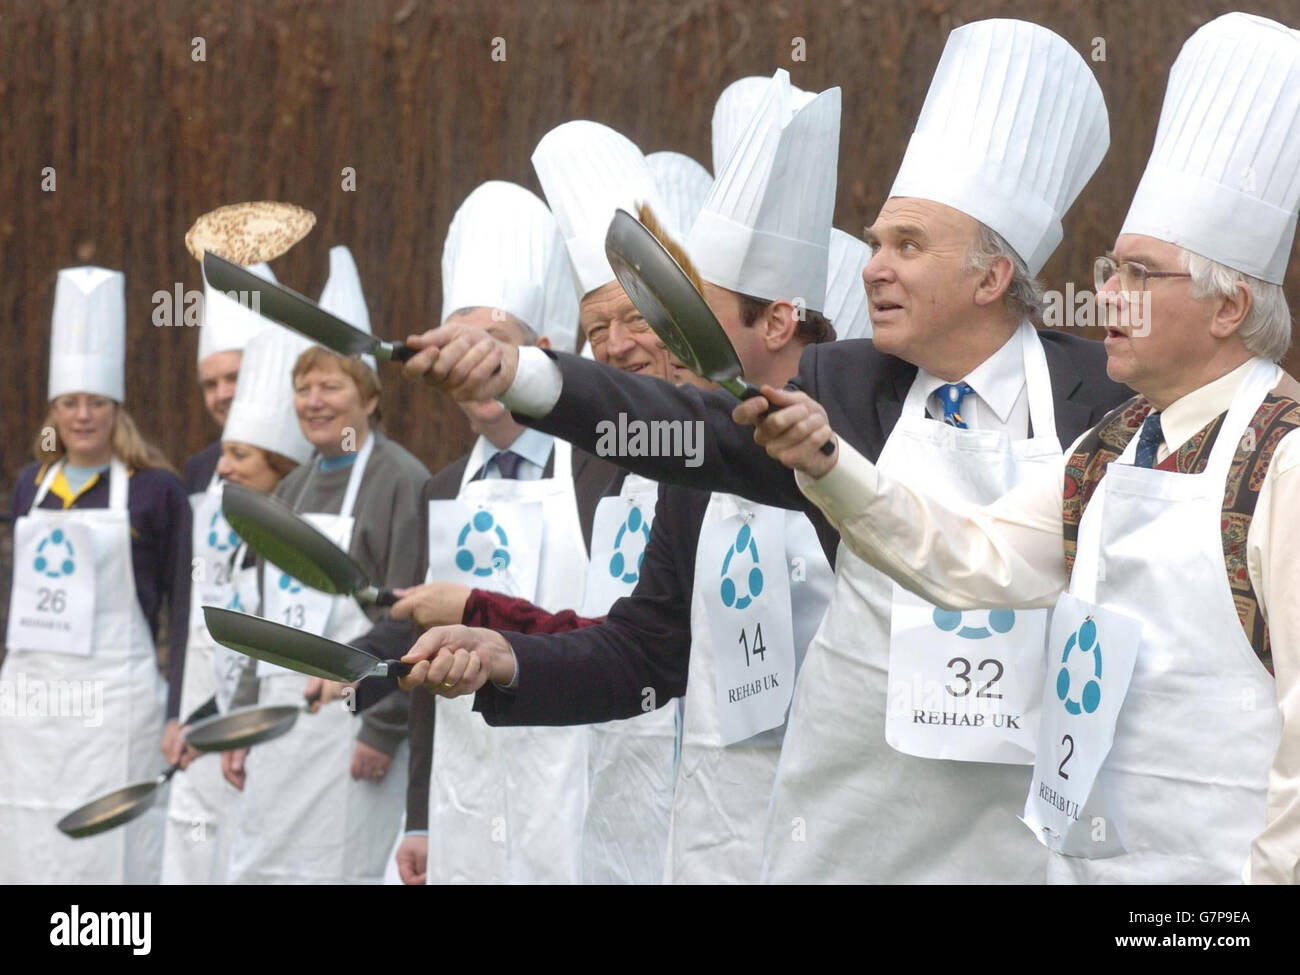 Liberal Democrat MP's Bob Russell (right), MP for Colchester, and Vince Cable (2nd right), MP for Twickenham, join other MP's and members from a wide range of constituencies as they prepare for the ninth Pancake Race between the House of Lords and the House of Commons. Stock Photo